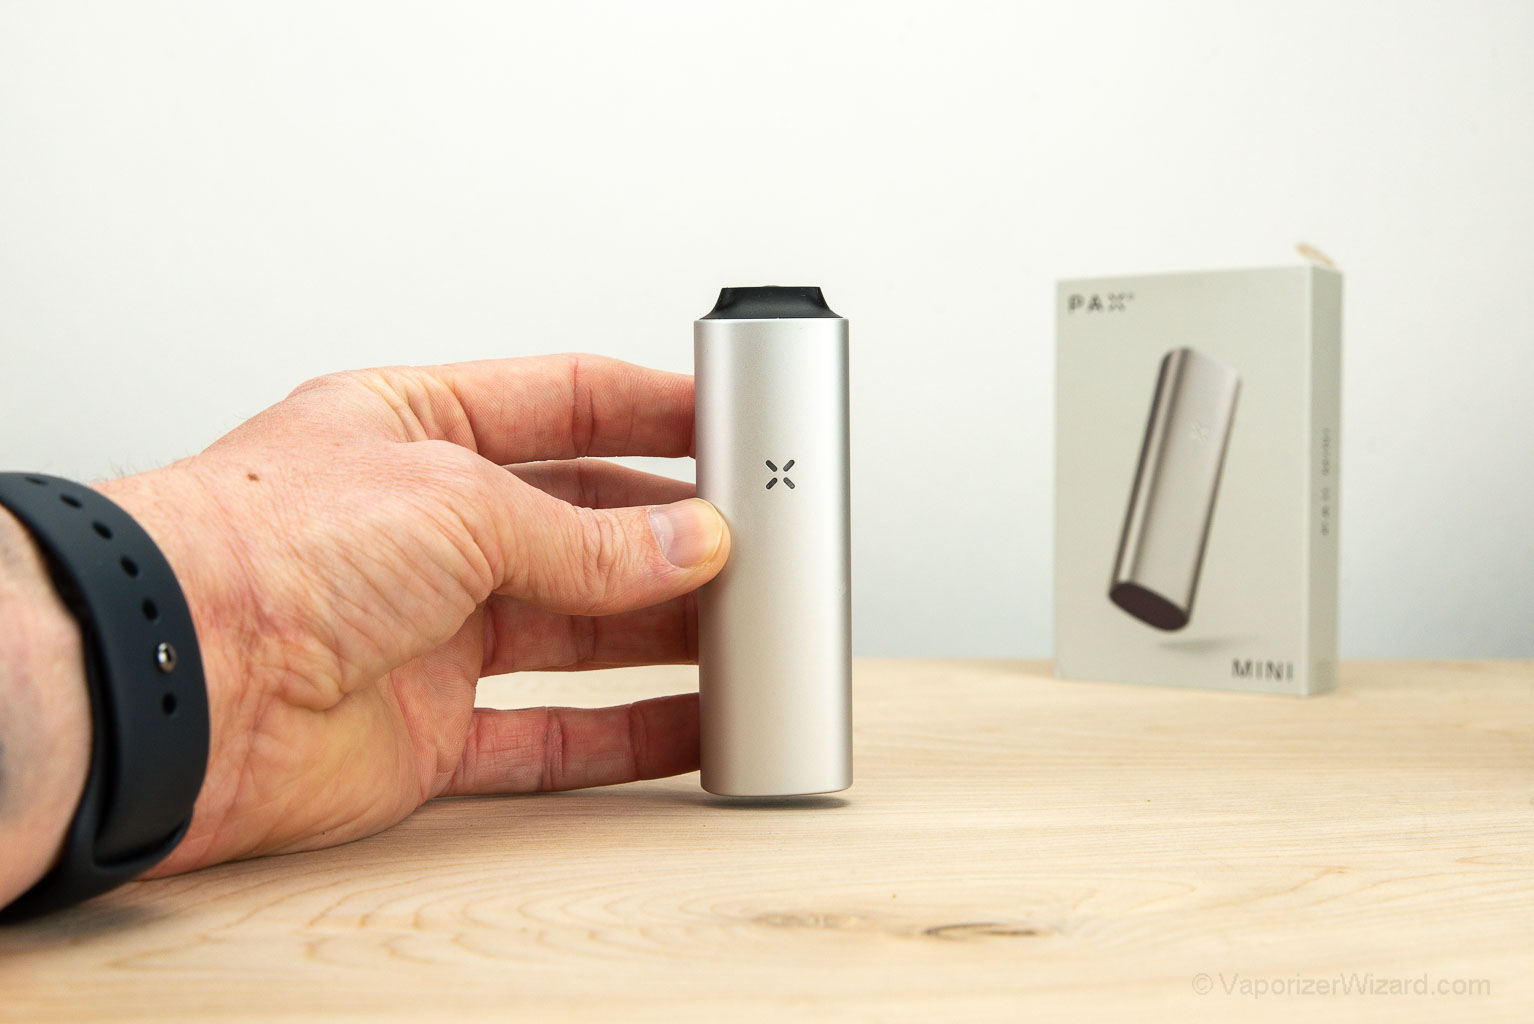 Everything you need to know about the PAX 3, Pax 3